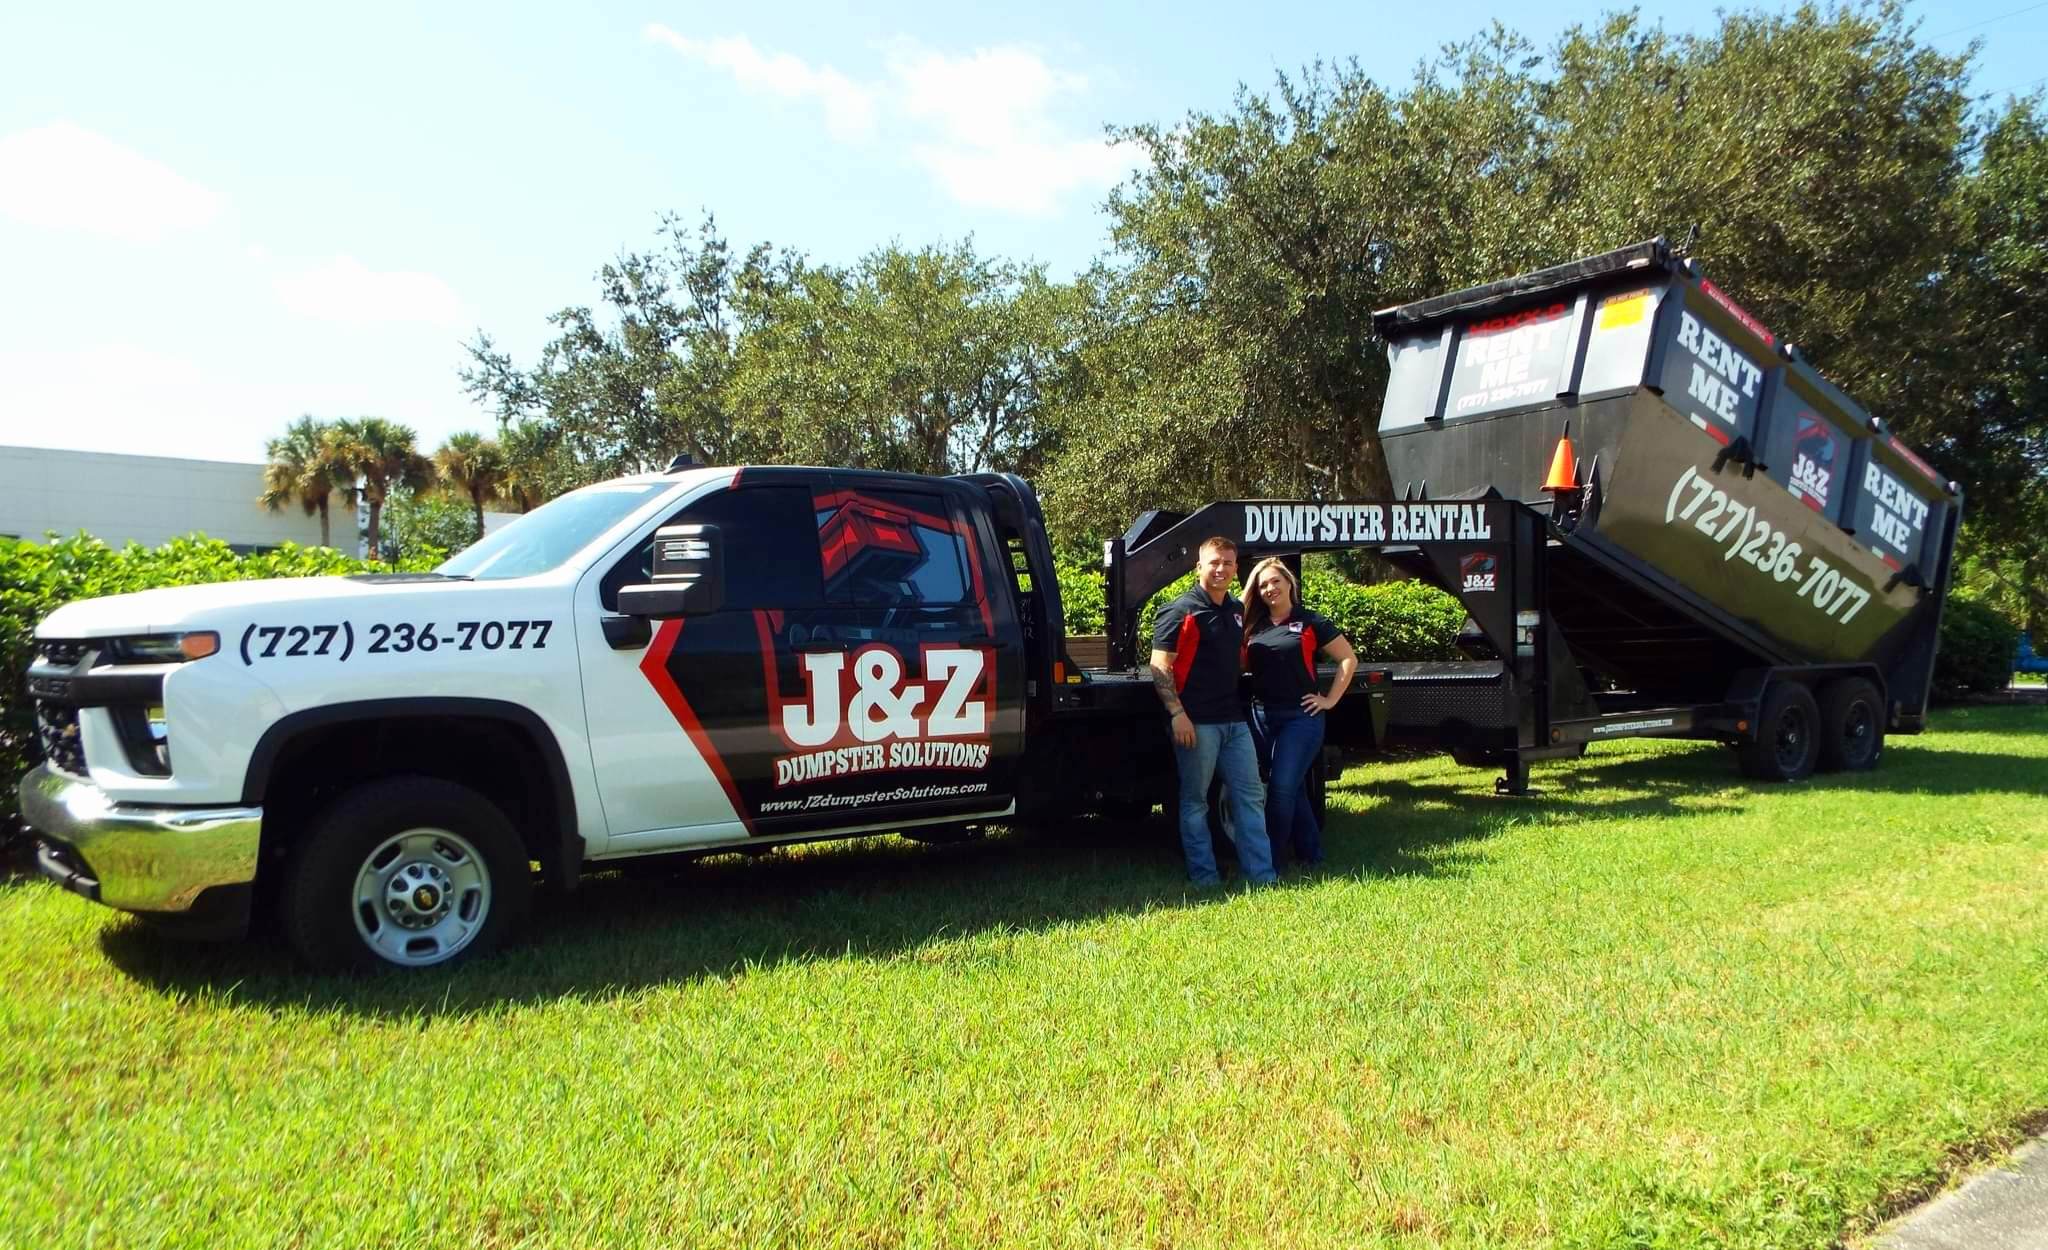 Book the Dumpster Rental Odessa, FL Contractors and Homeowners Use for All Projects